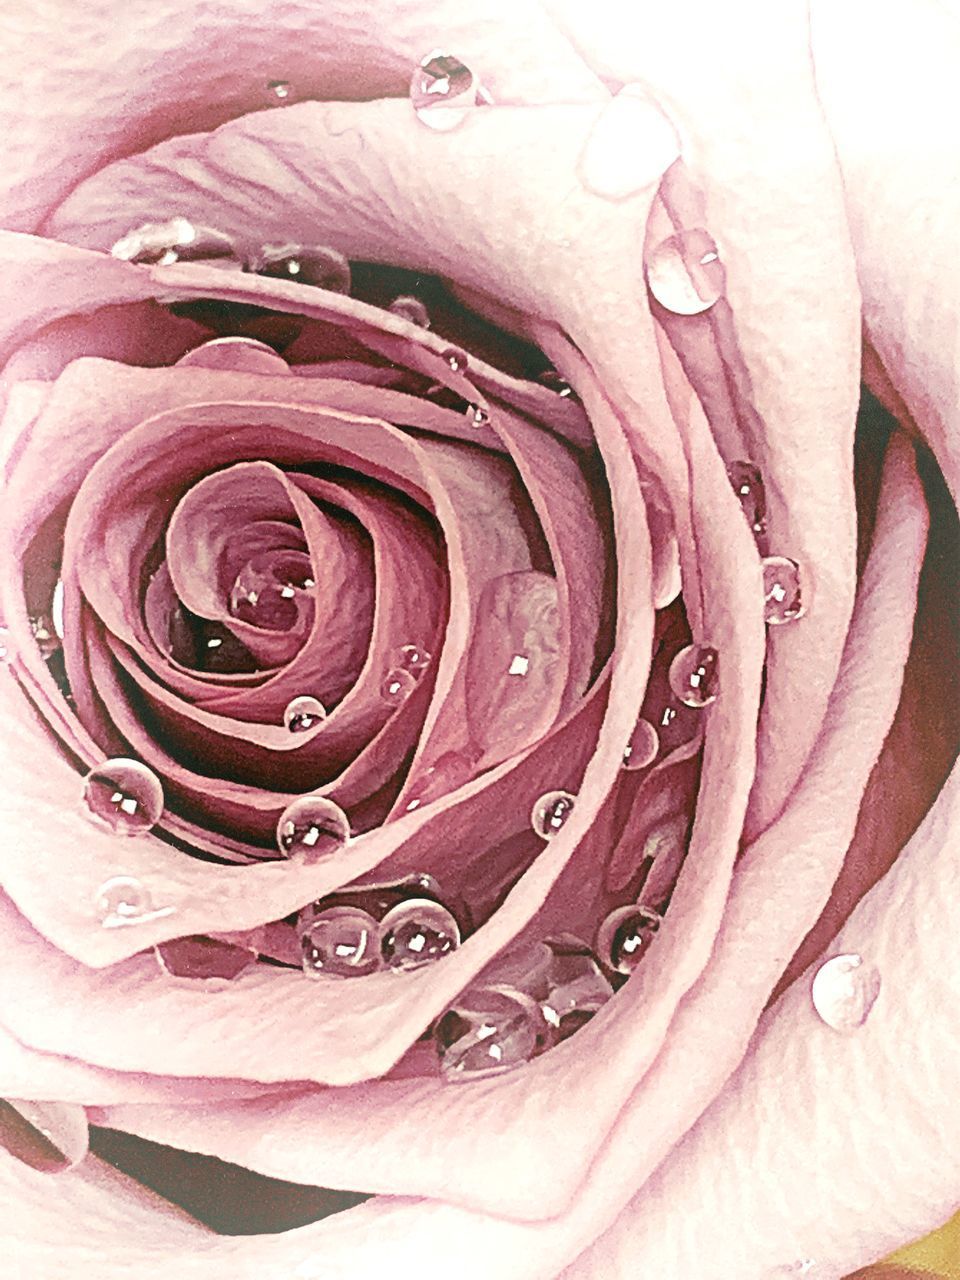 CLOSE-UP OF RAINDROPS ON ROSE